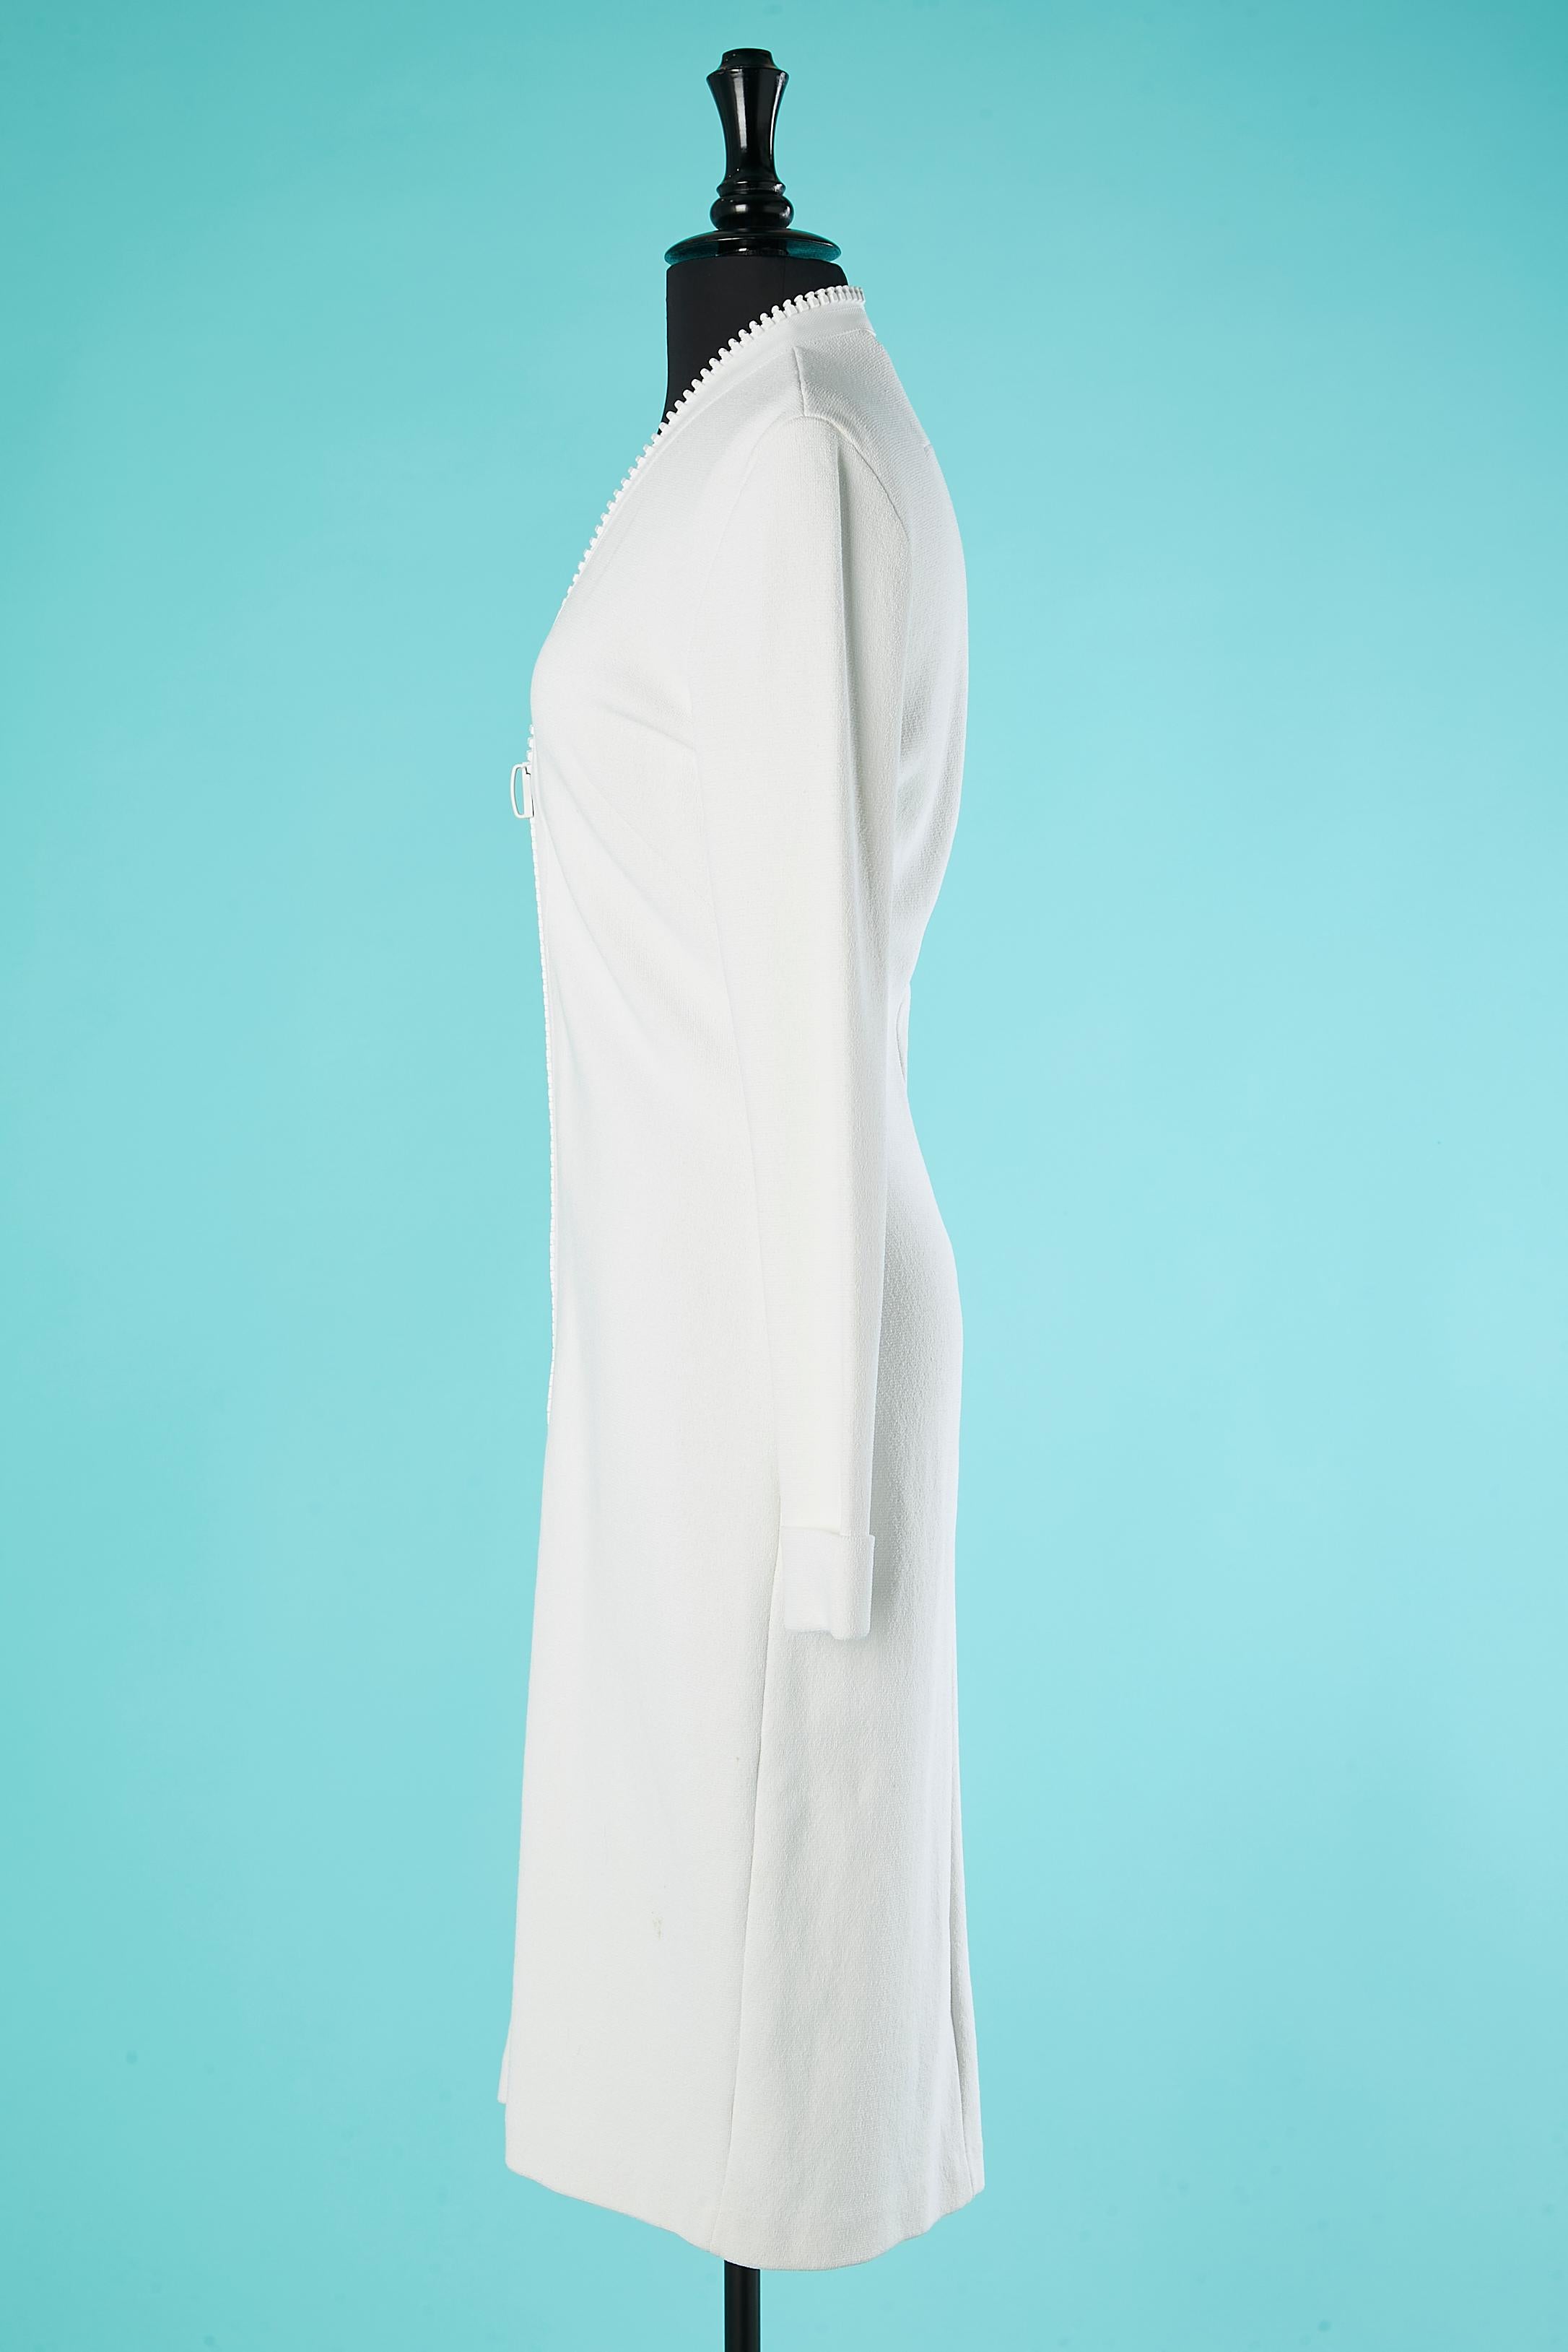 Gray White dress with oversize zip middle front Givenchy by Ricardo Tisci Spring 2016 For Sale